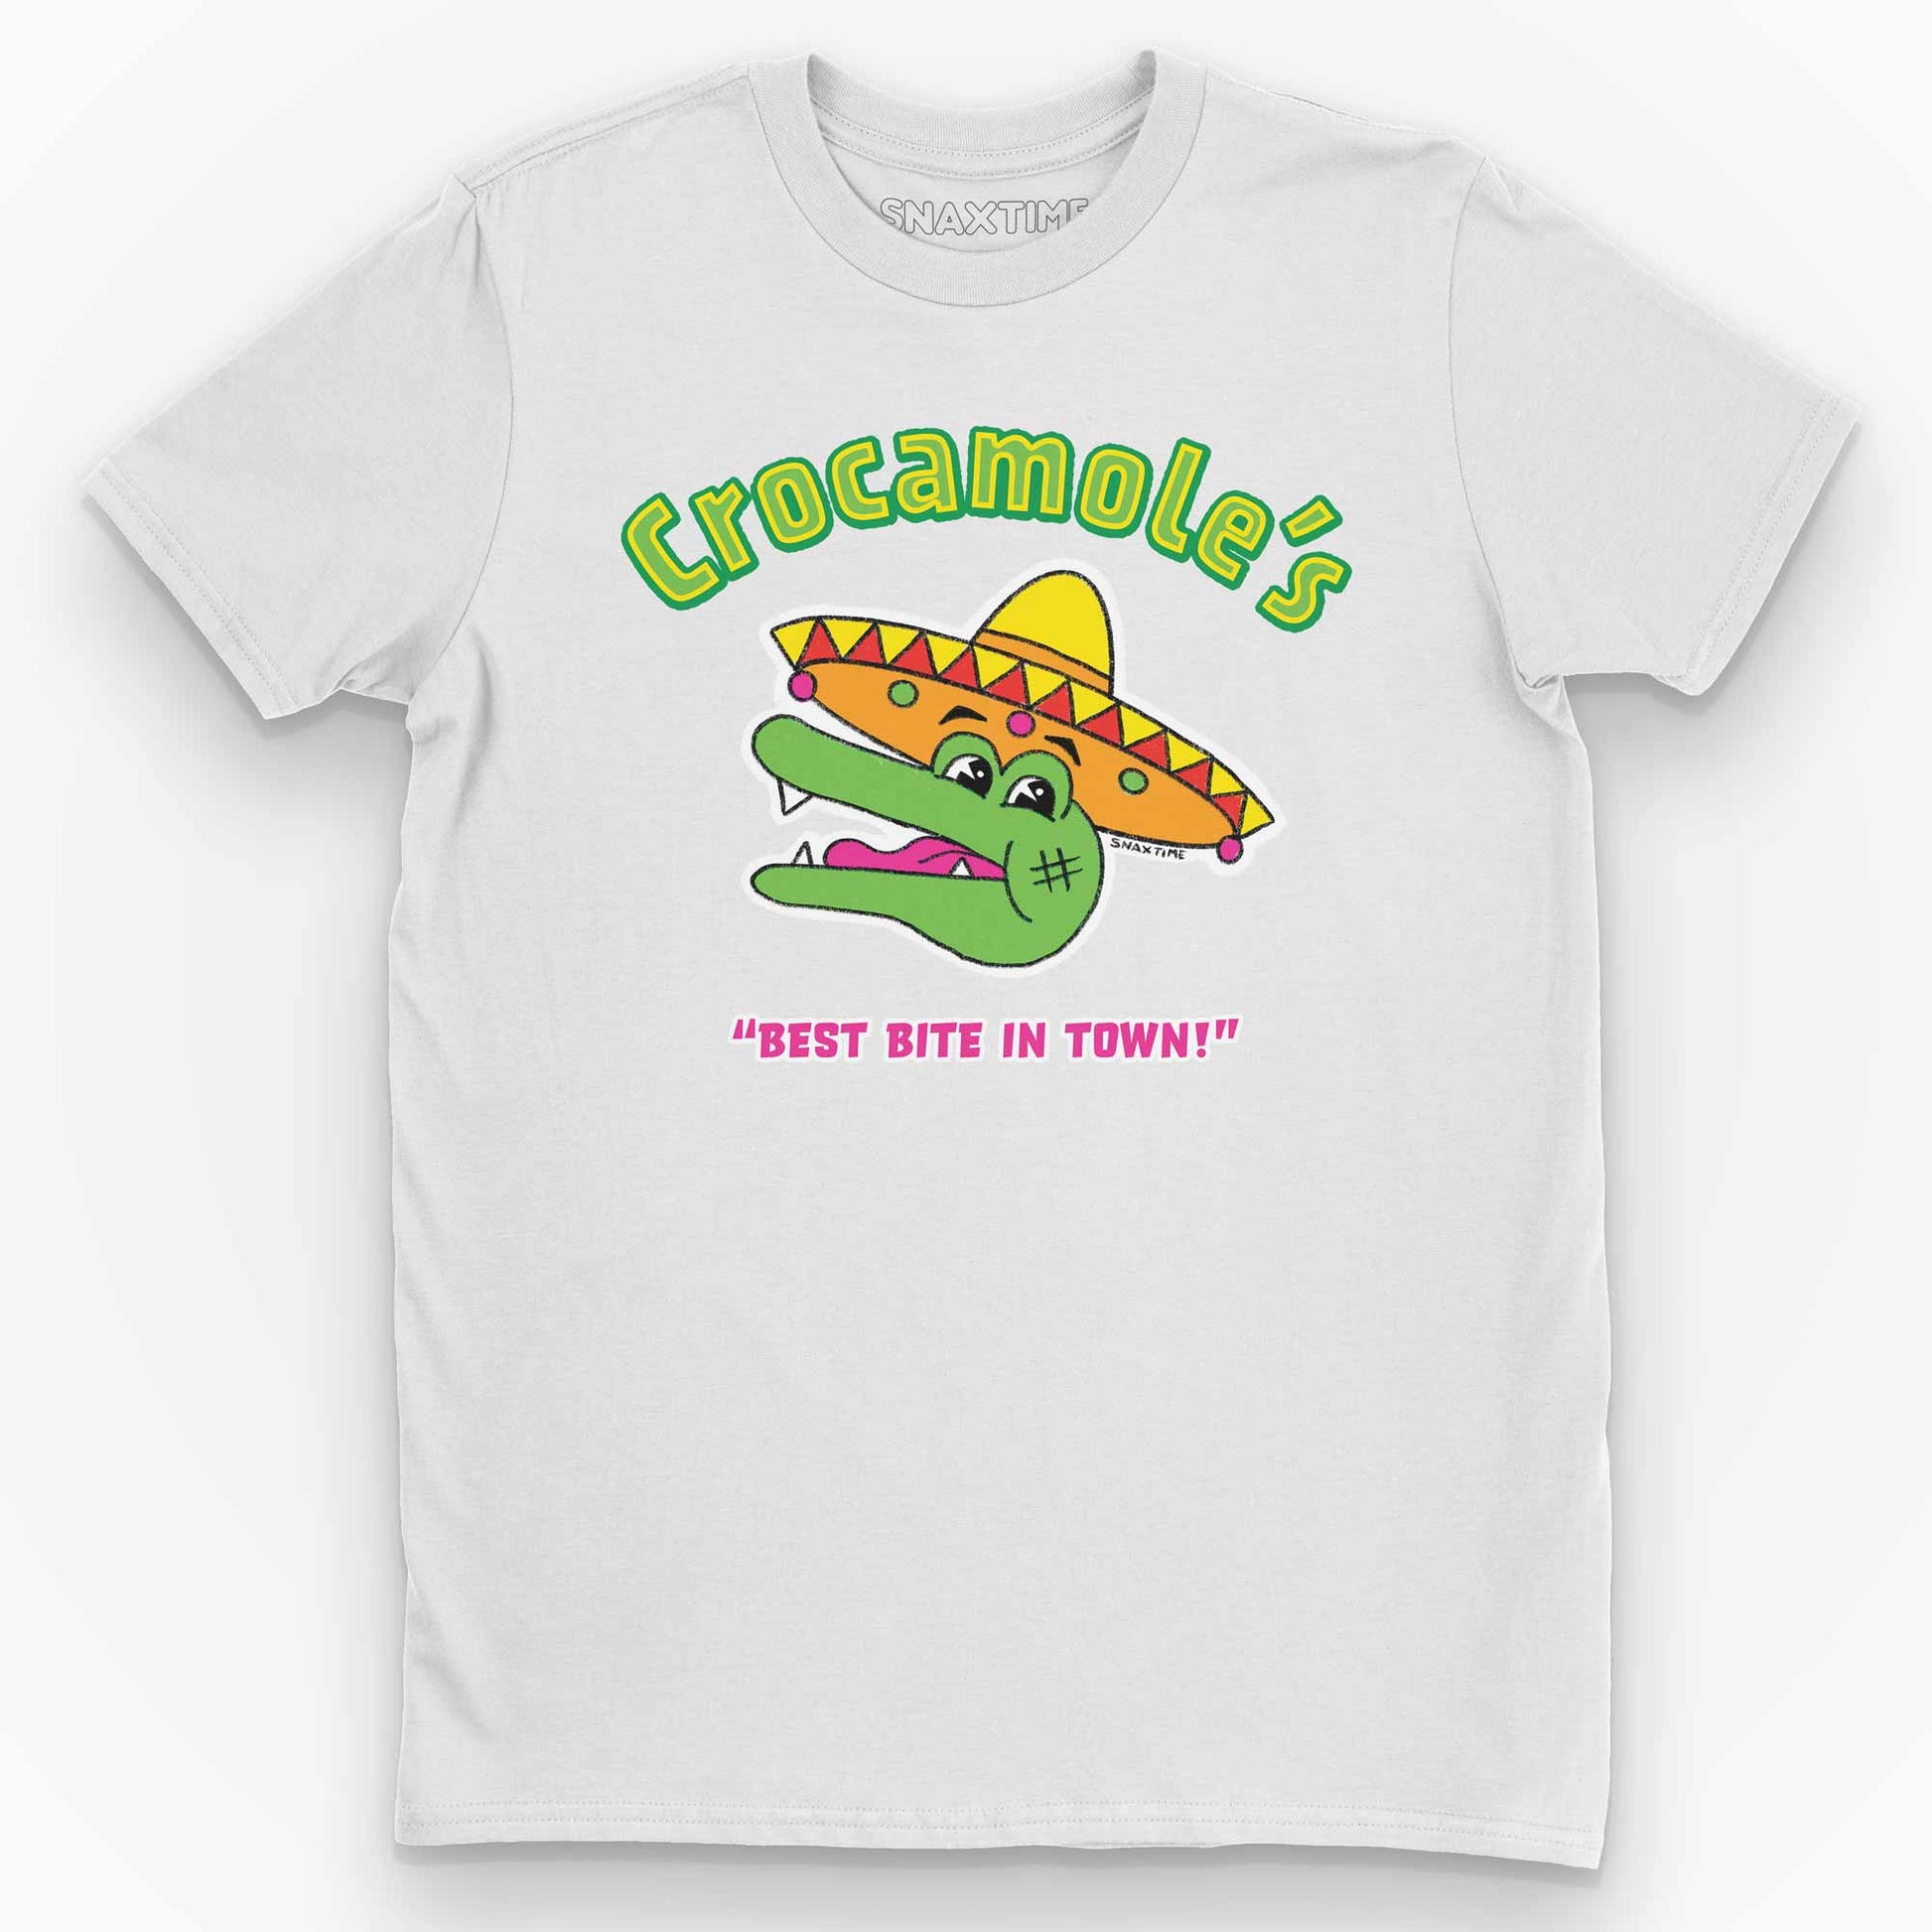 "Crocamole's" Mexican Restaurant Graphic T-Shirt - Snaxtime Retro Style Food Apparel